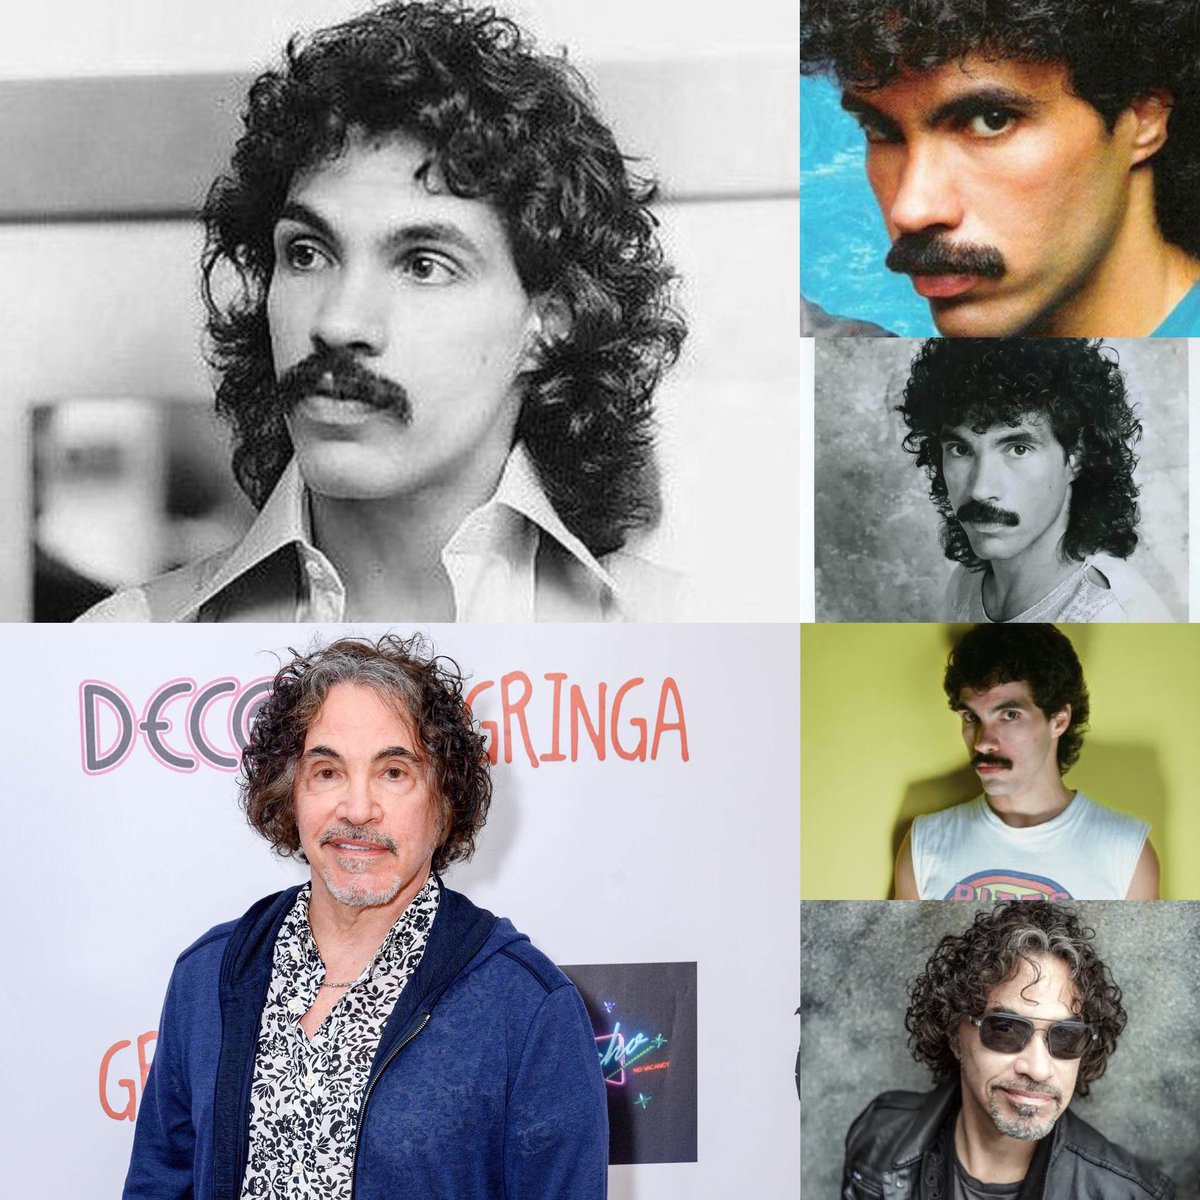 Happy 76th Birthday! John William Oates (born April 7, 1948) he is not only a talented musician and songwriter but also an accomplished guitarist. He is known for his distinctive mustache, which has become one of his trademark features.
#the80srule #happybirthday @JohnOates